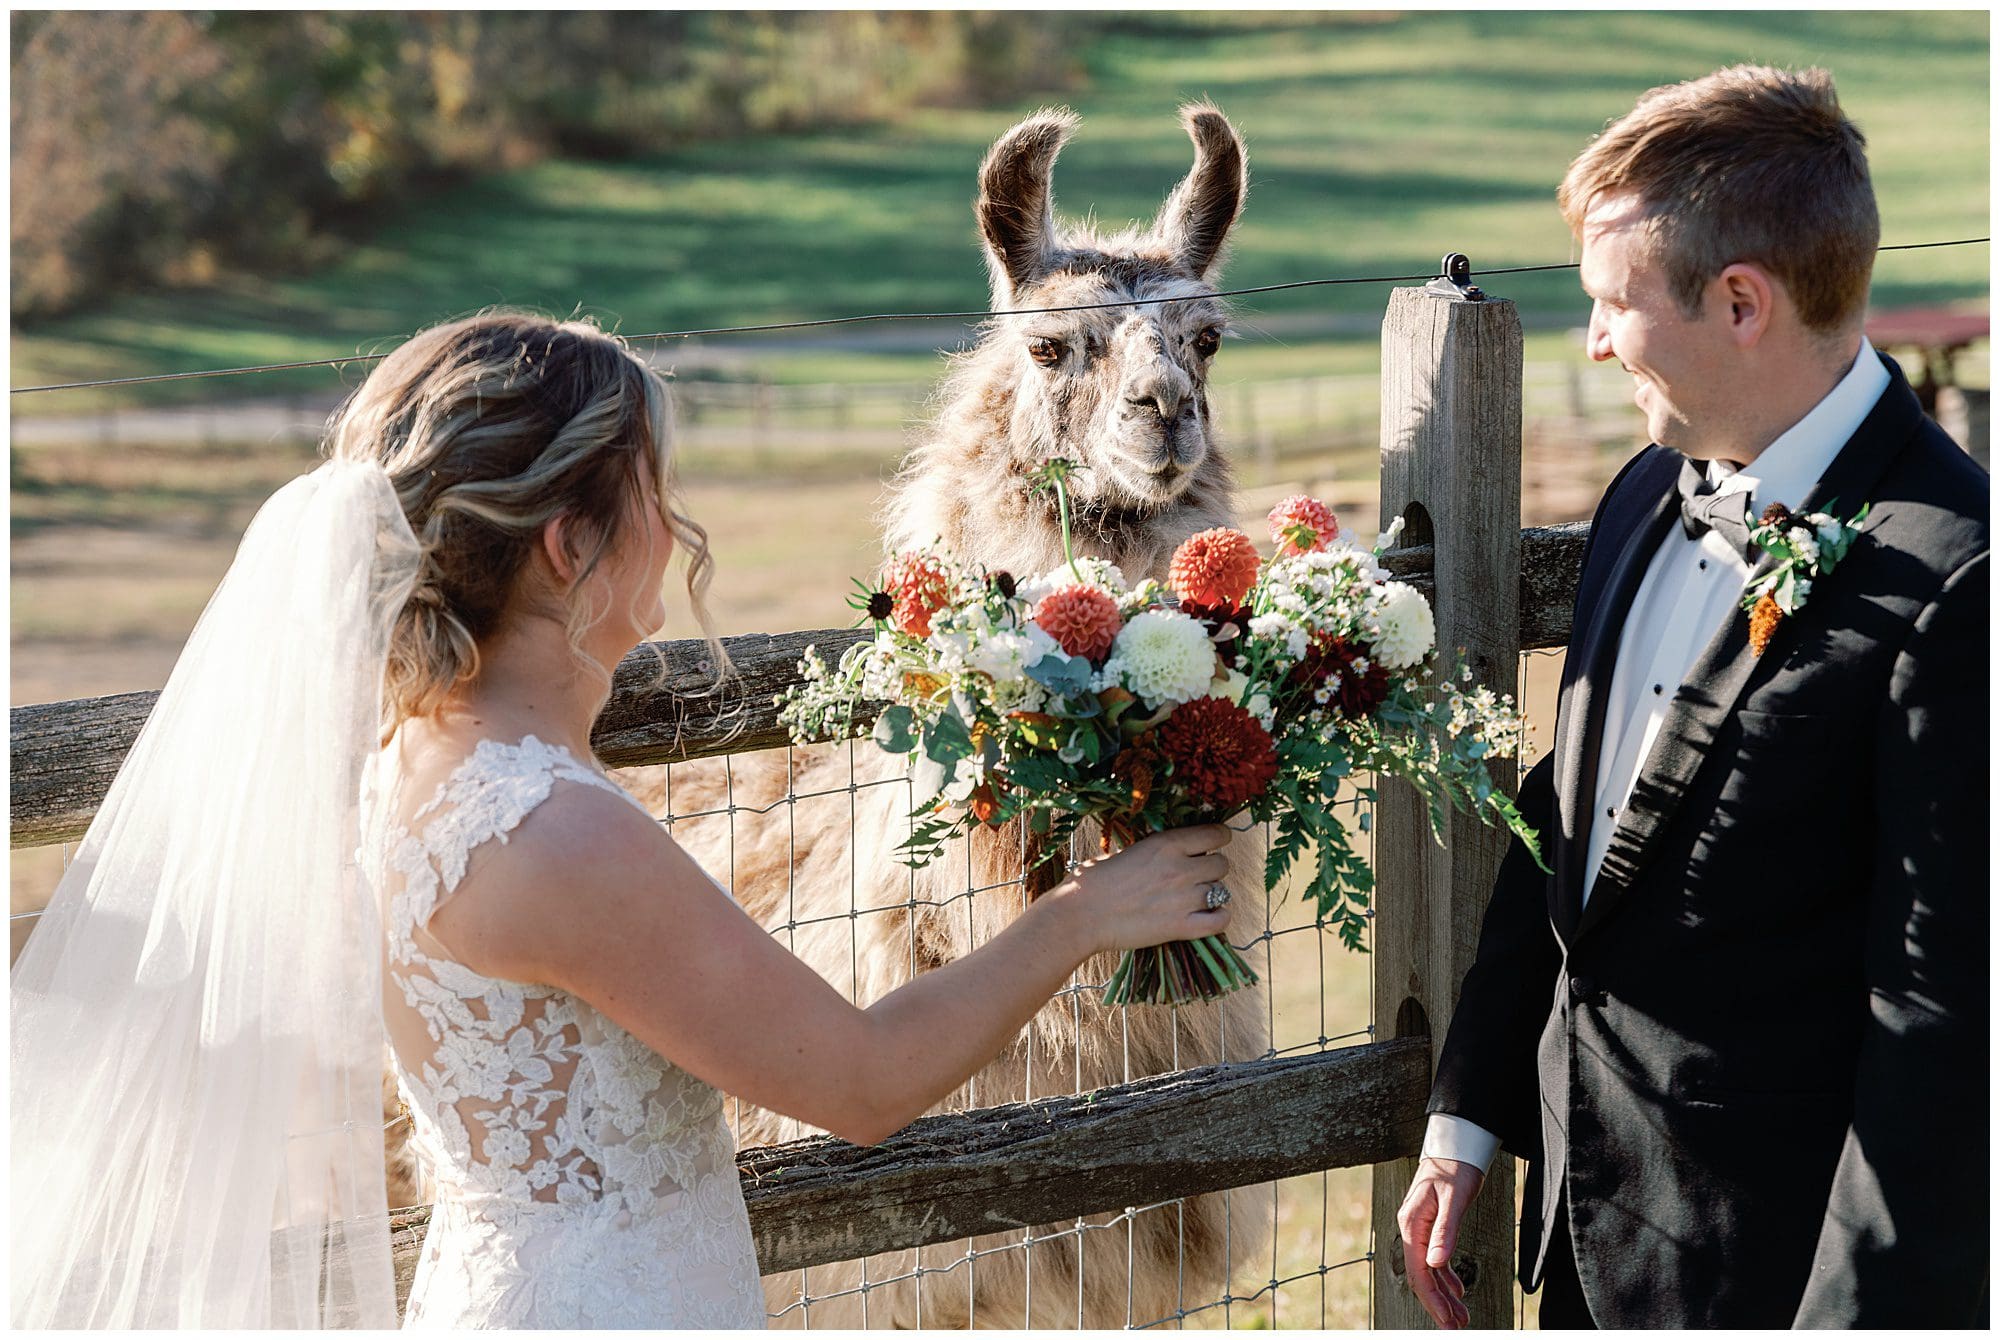 A bride and groom interacting with a llama over a wooden fence at their wedding, surrounded by a pastoral landscape.